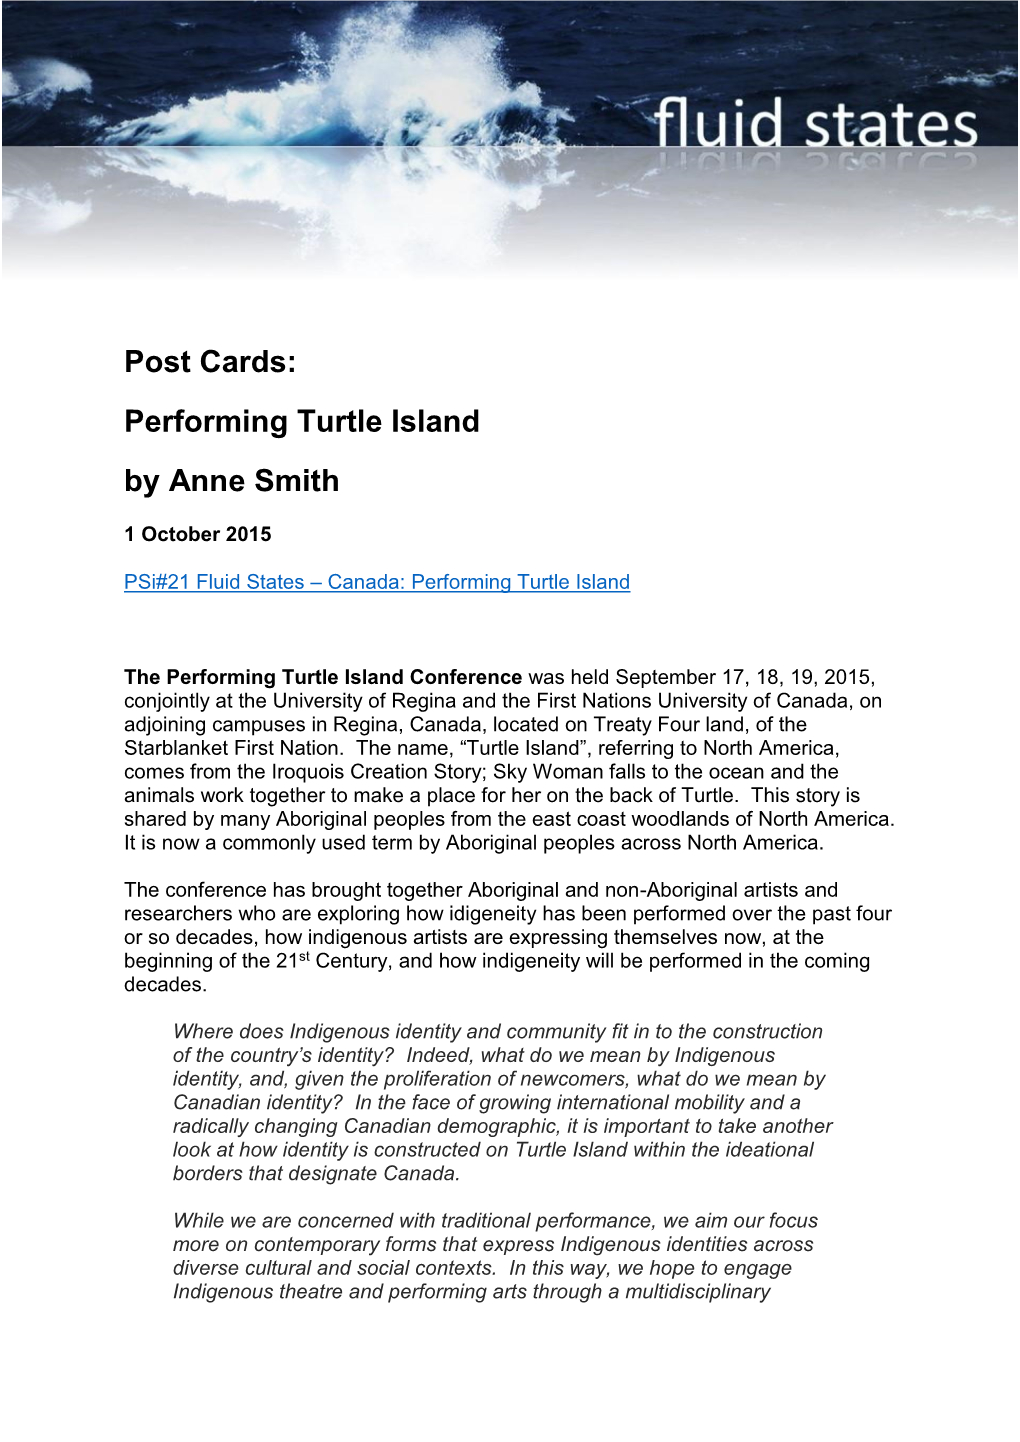 Post Cards: Performing Turtle Island by Anne Smith